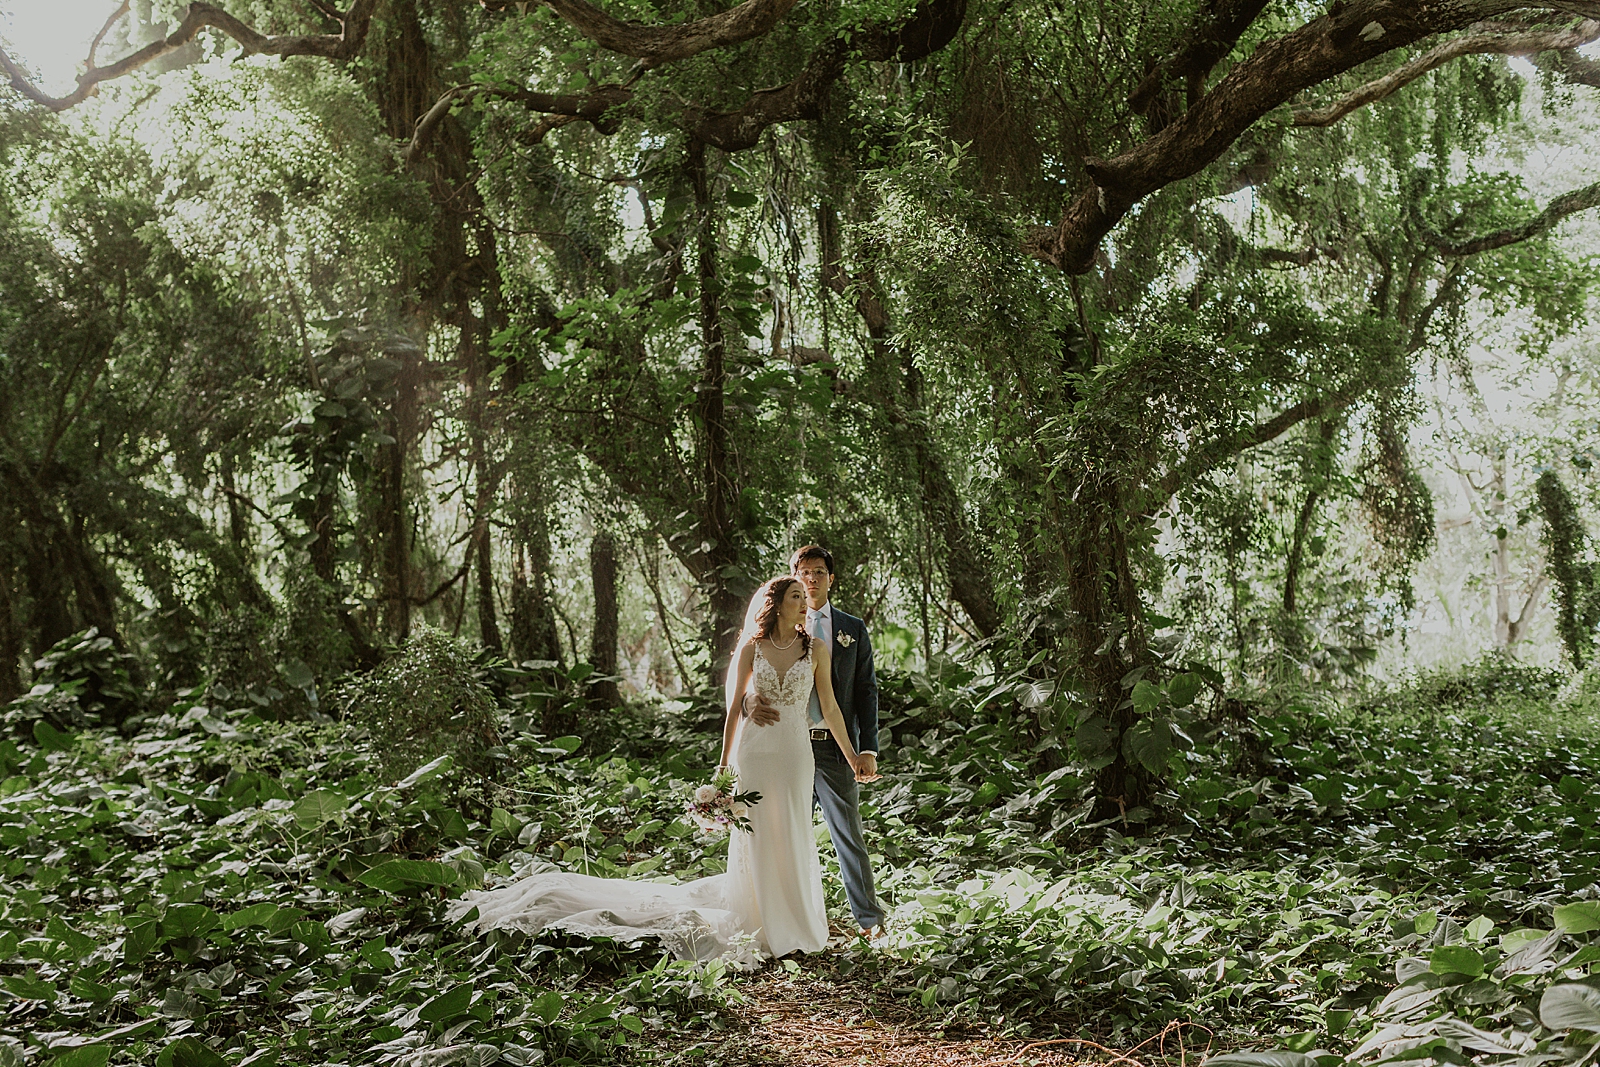 Groom holding Bride from behind in the green forest